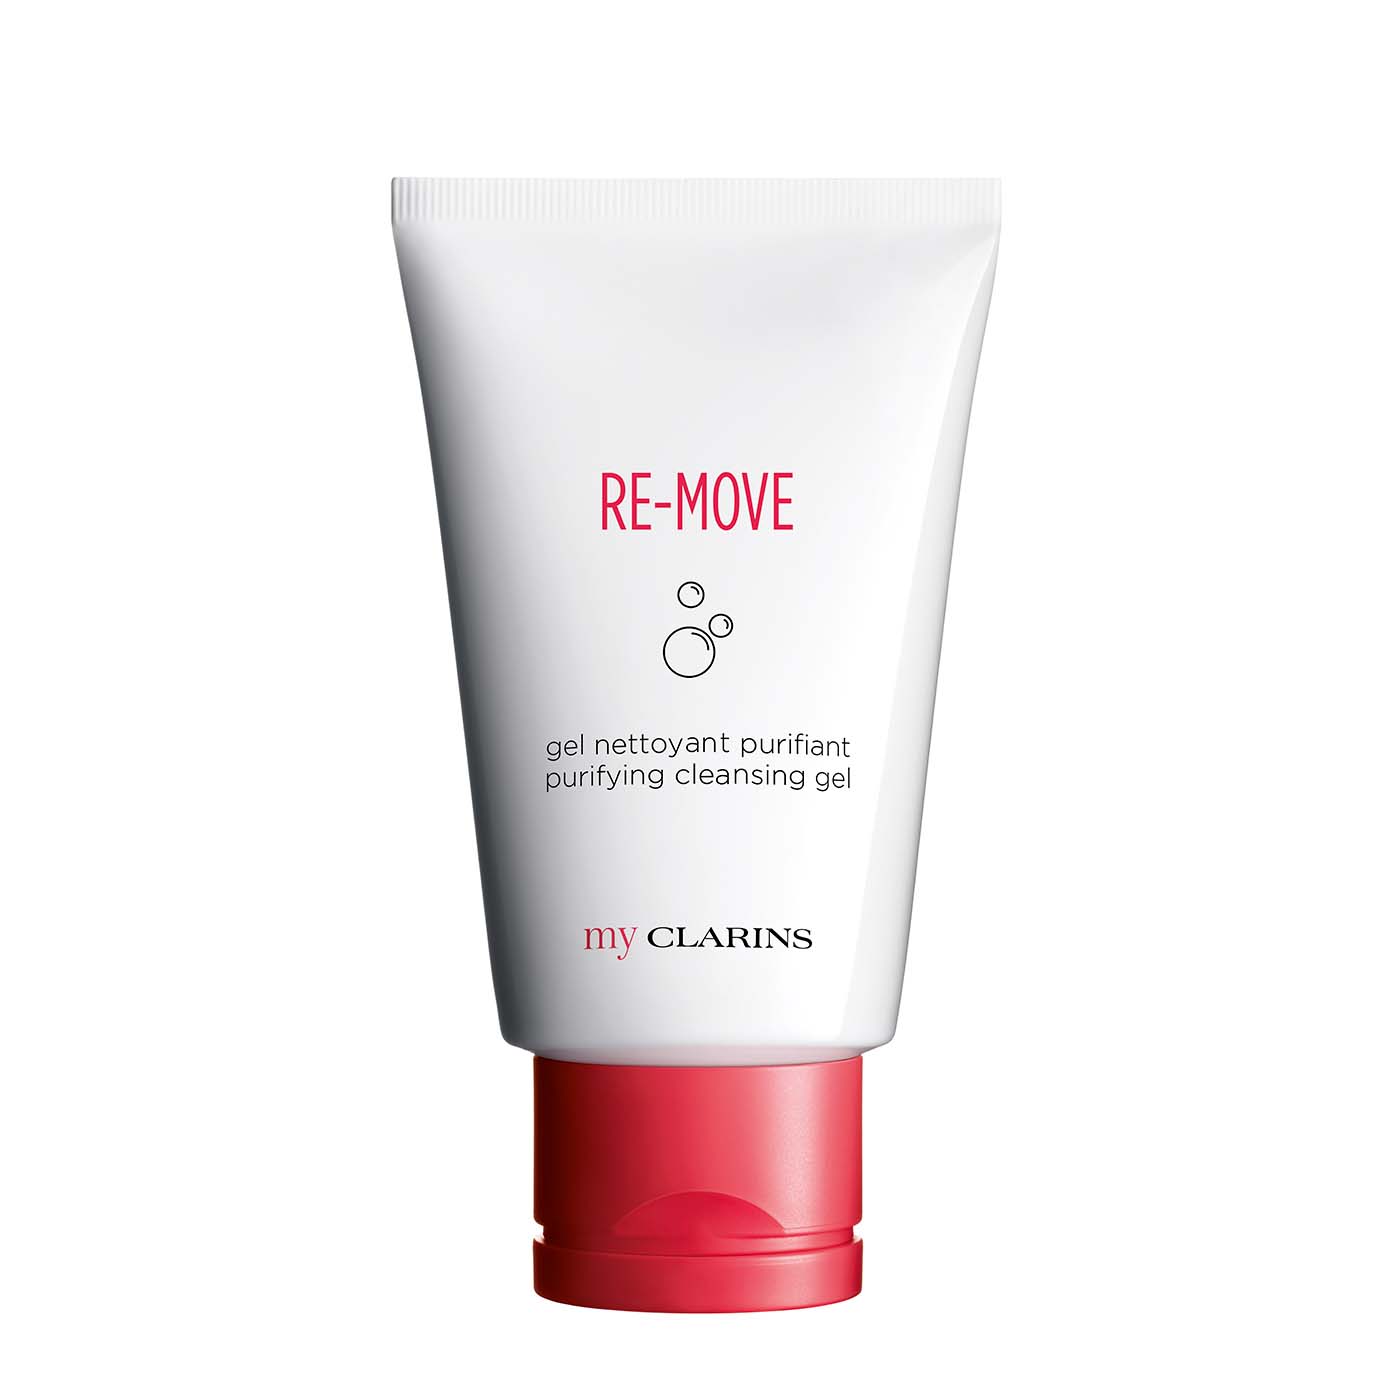 RE-MOVE Gel Nettoyant Purifiant My Clarins CLARINS®